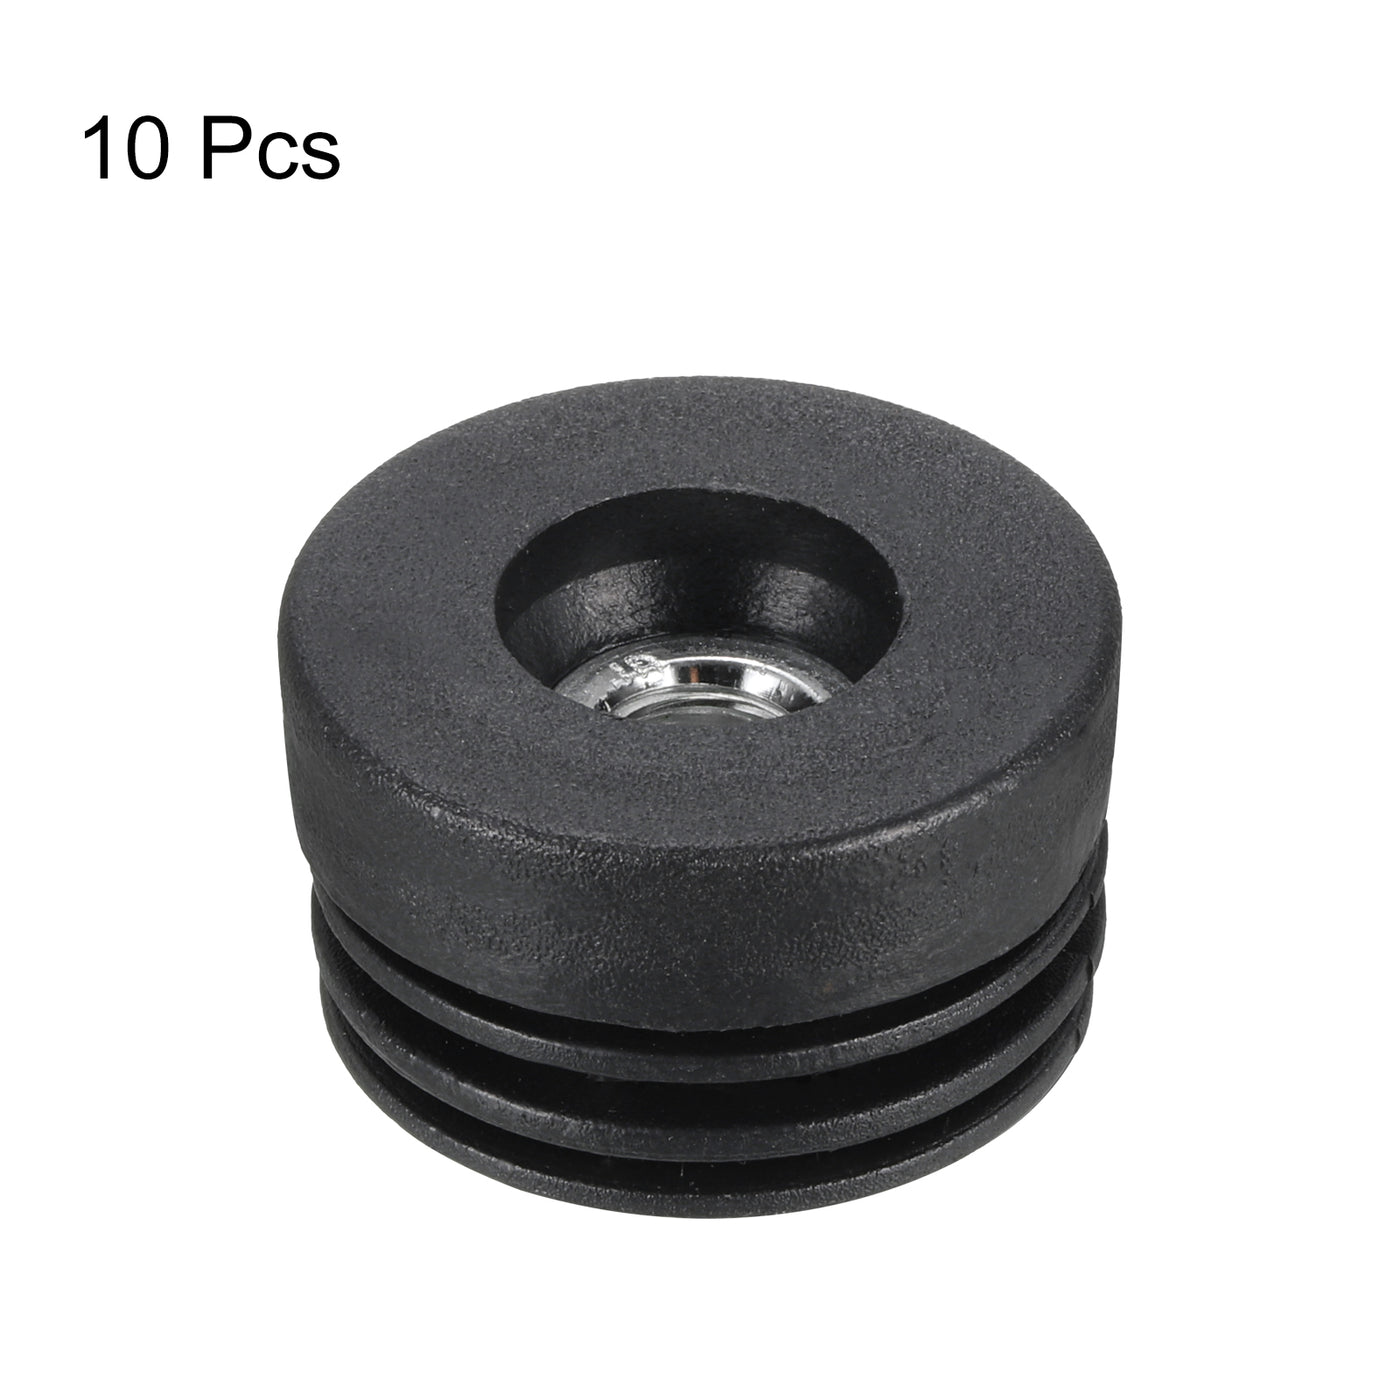 uxcell Uxcell 10Pcs Caster Insert with Thread, 38mm/1.5" M10 Thread for Furniture